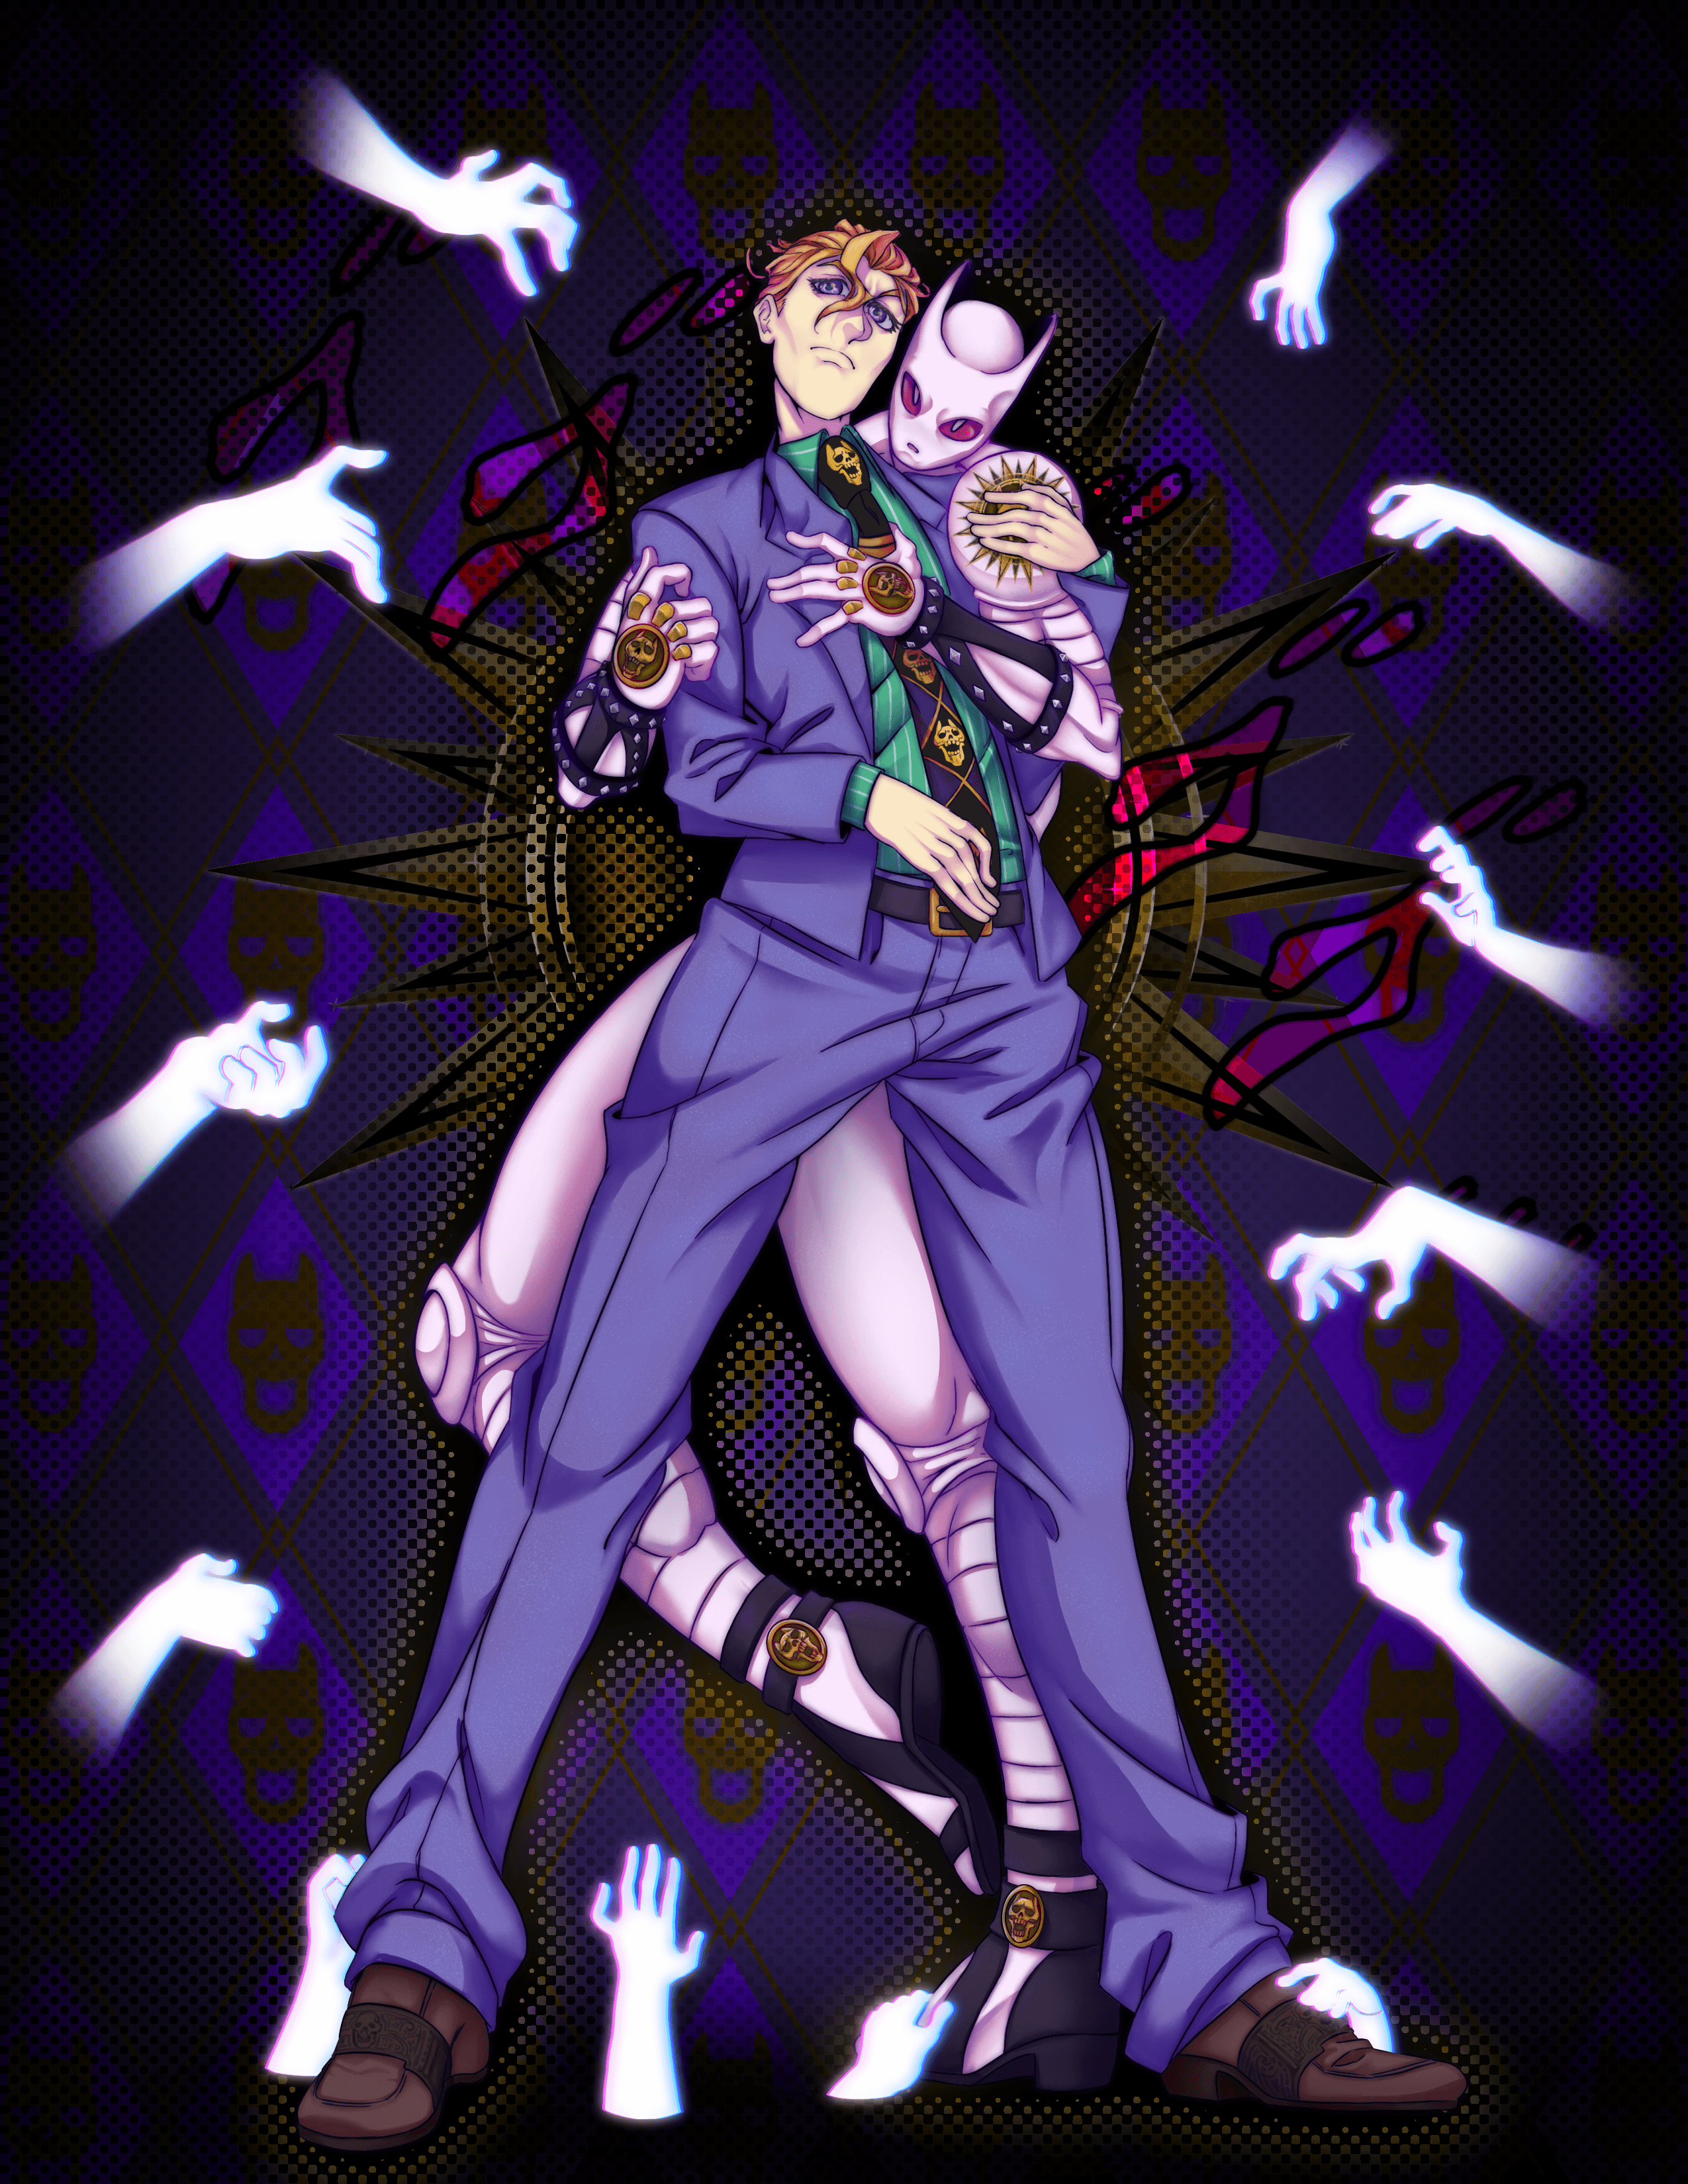 Fanart Yoshikage Kira and his Killer Queen by: thesuidguy